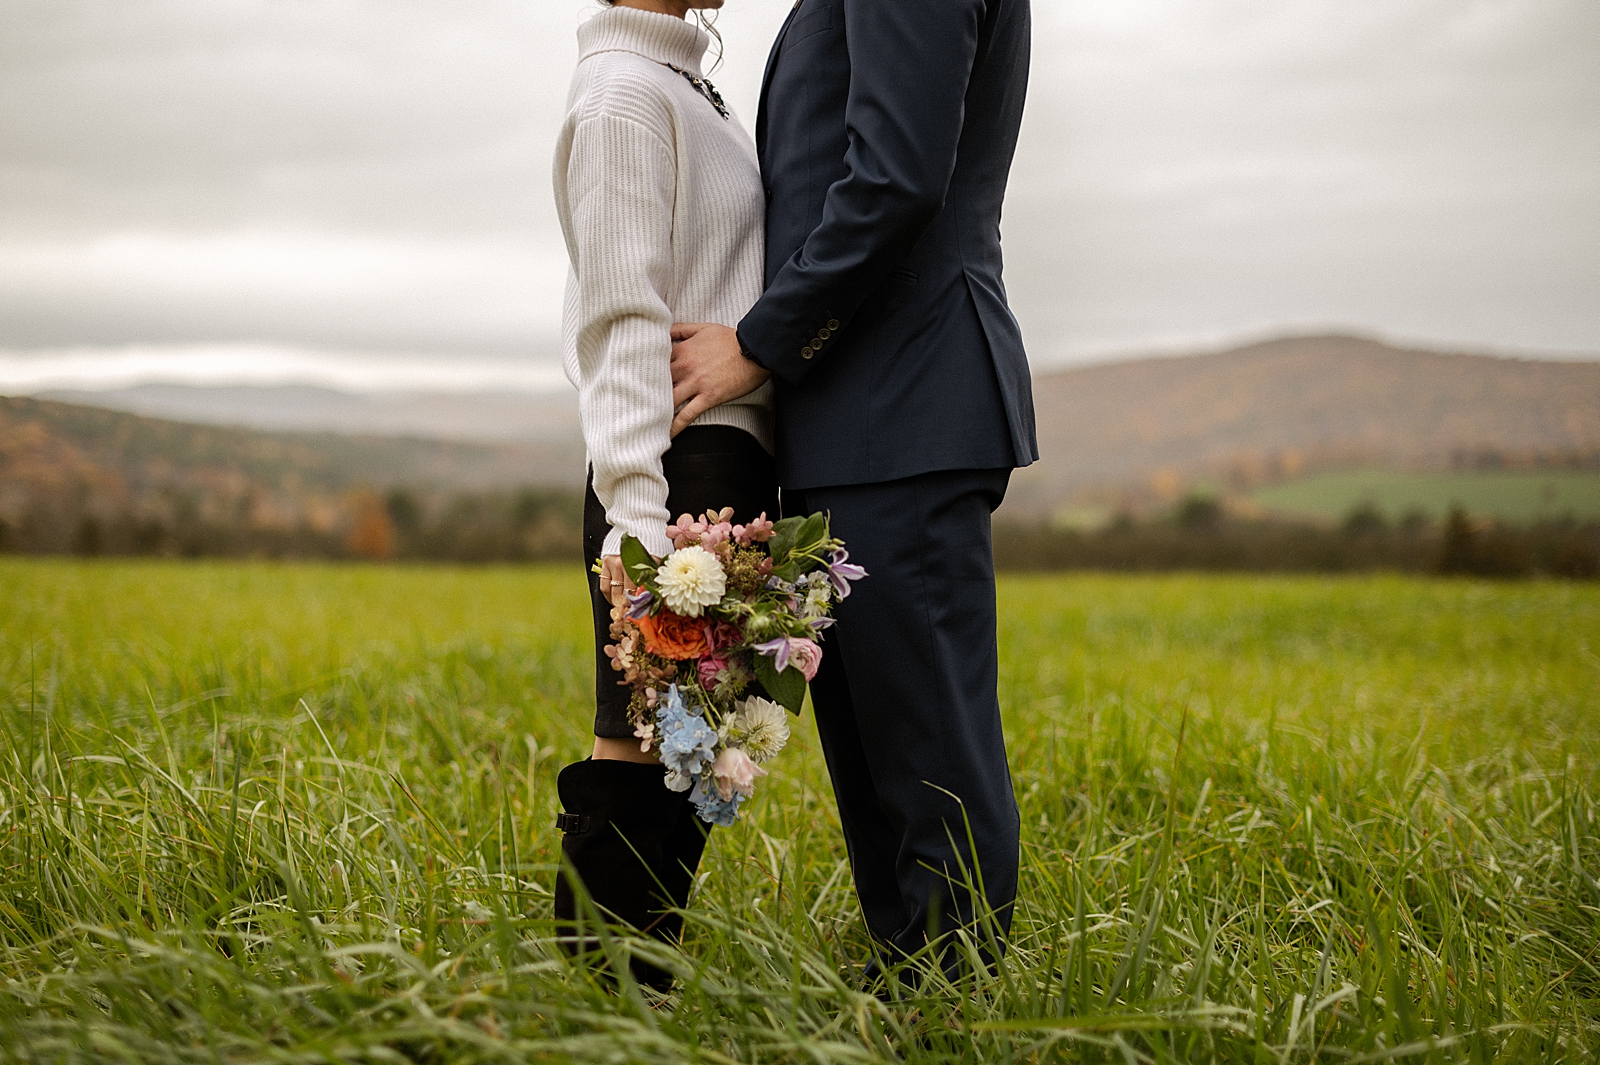 Closeup of Groom holding Bride and Bride holding bouquet in tall grassy field